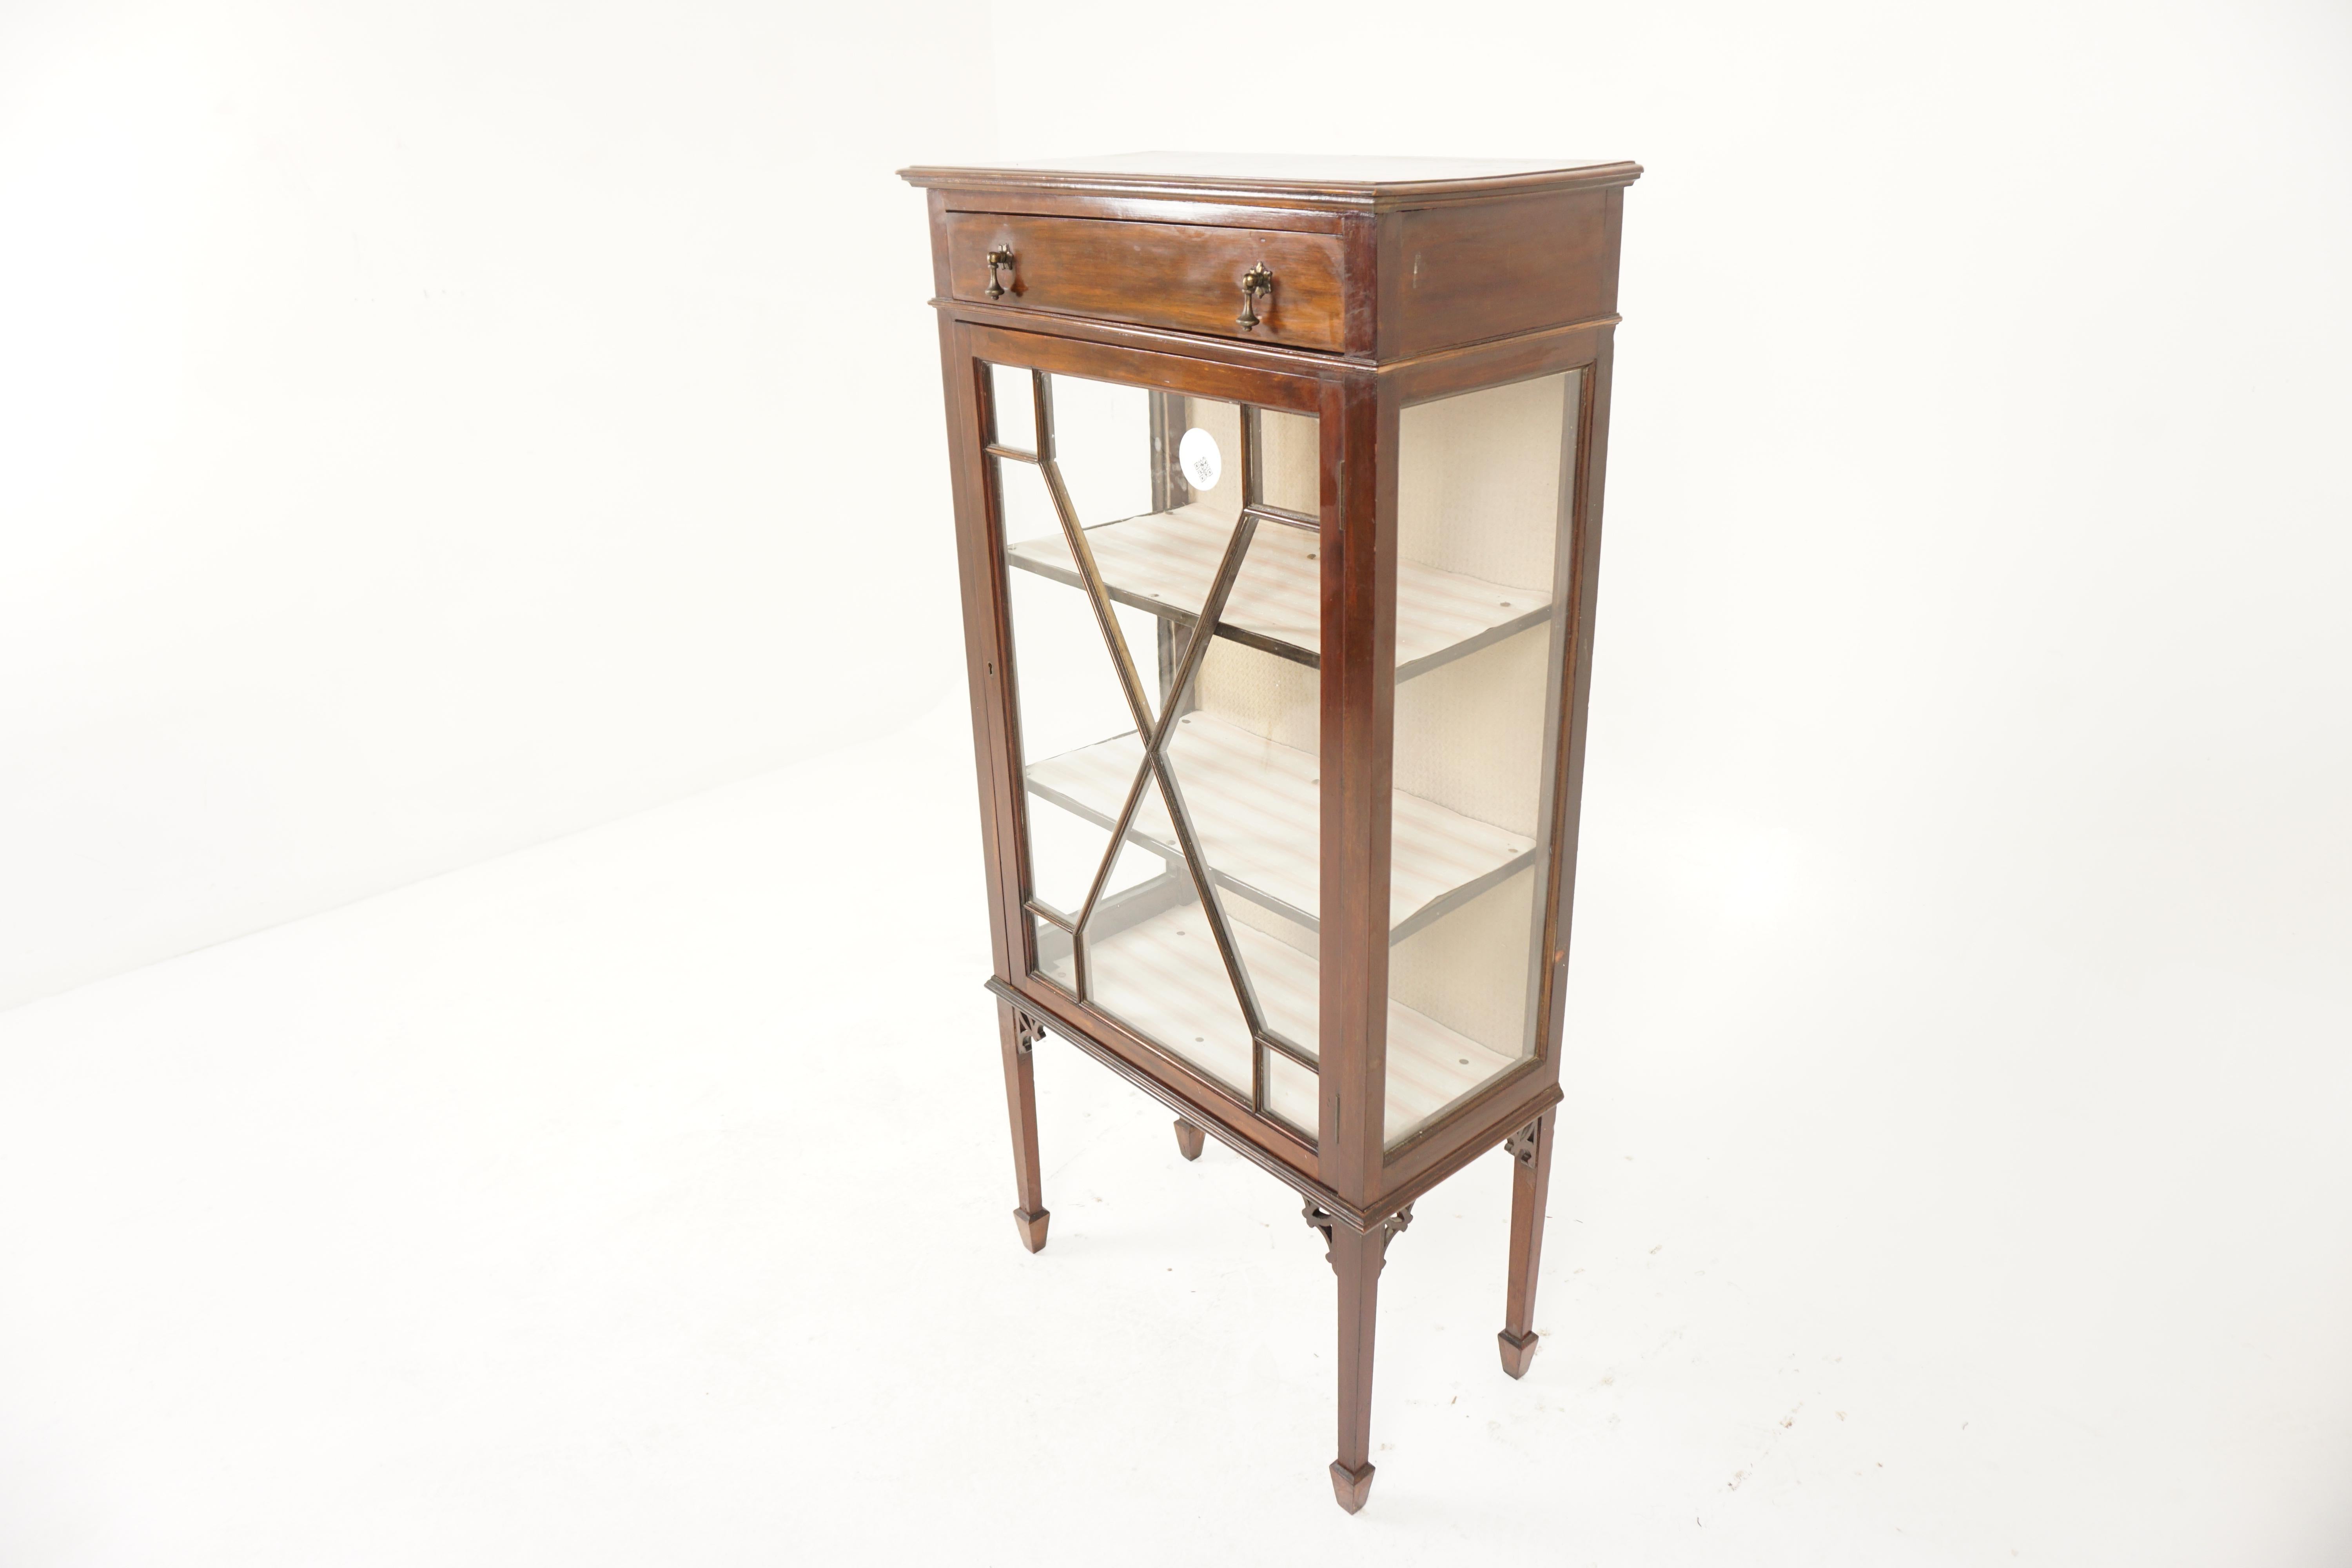 Antique Walnut Single Door China Display Cabinet, Scotland 1900, H1105

Solid Walnut
Original finish
Rectangular moulded top 
Single dovetailed drawer below
Original drop handles
Single original eight panel glass doors
Opens to reveal a pair of